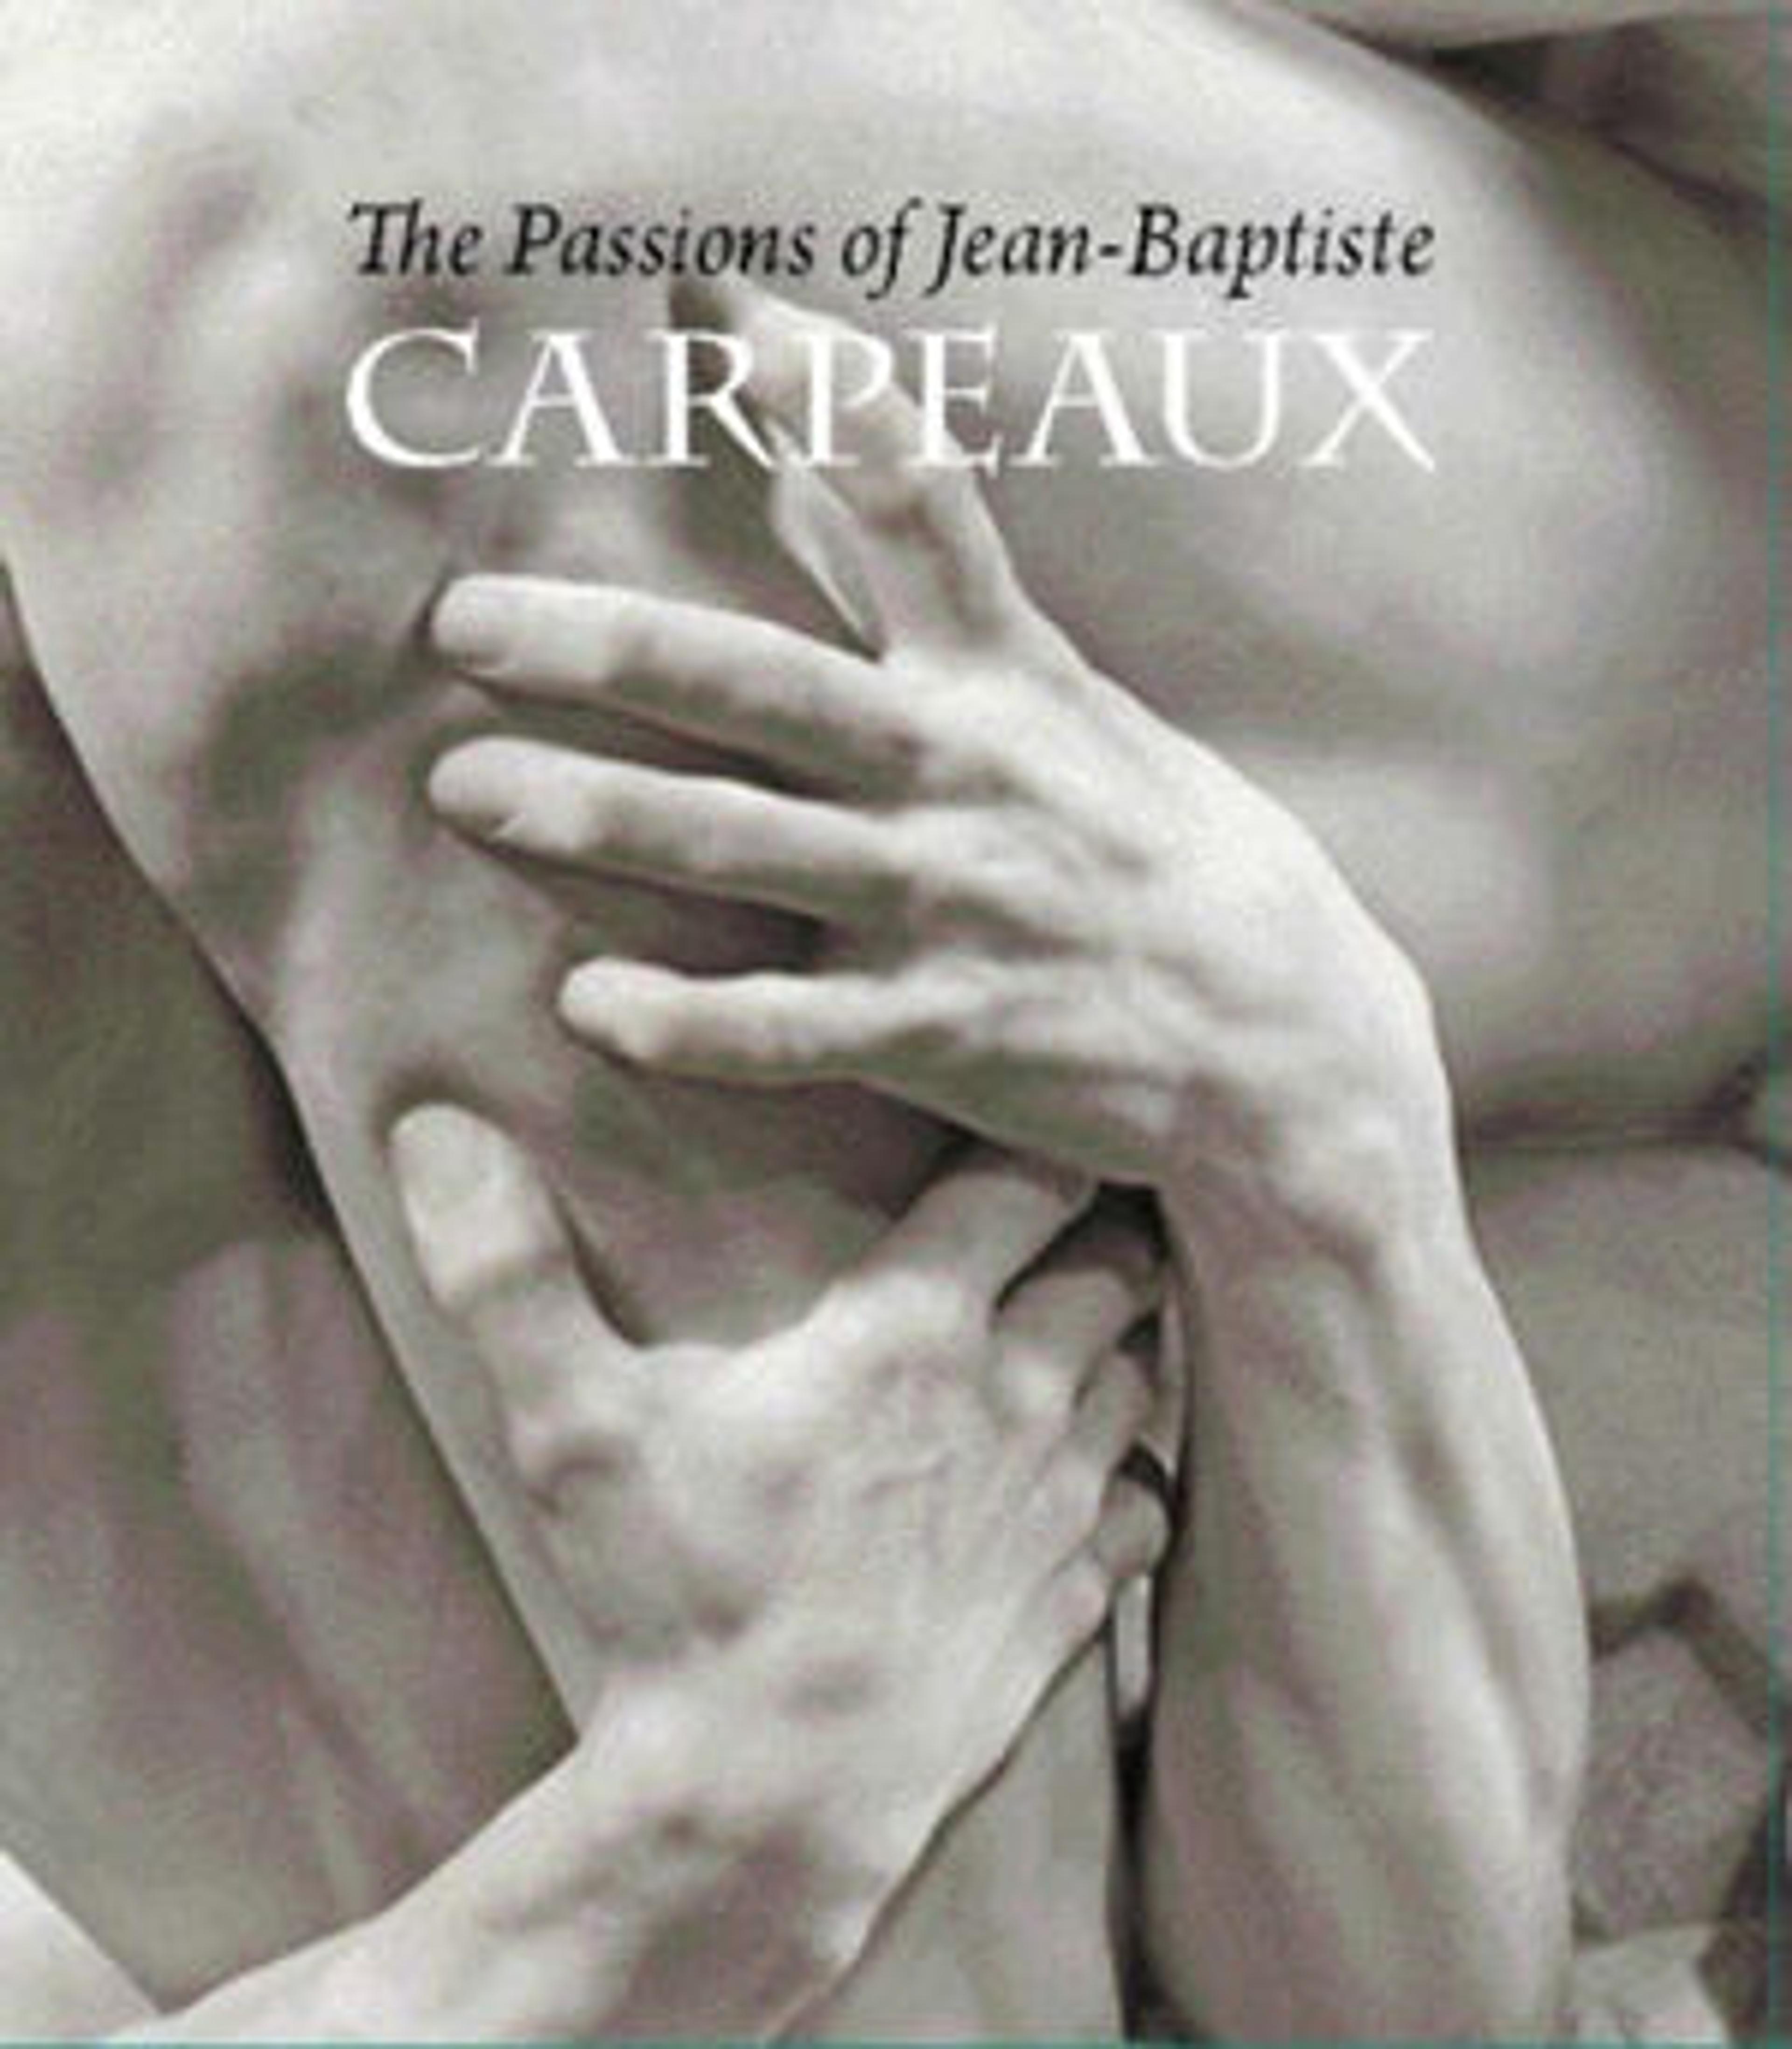 The Passions of Jean-Baptiste Carpeaux by James David Draper and Edouard Papet